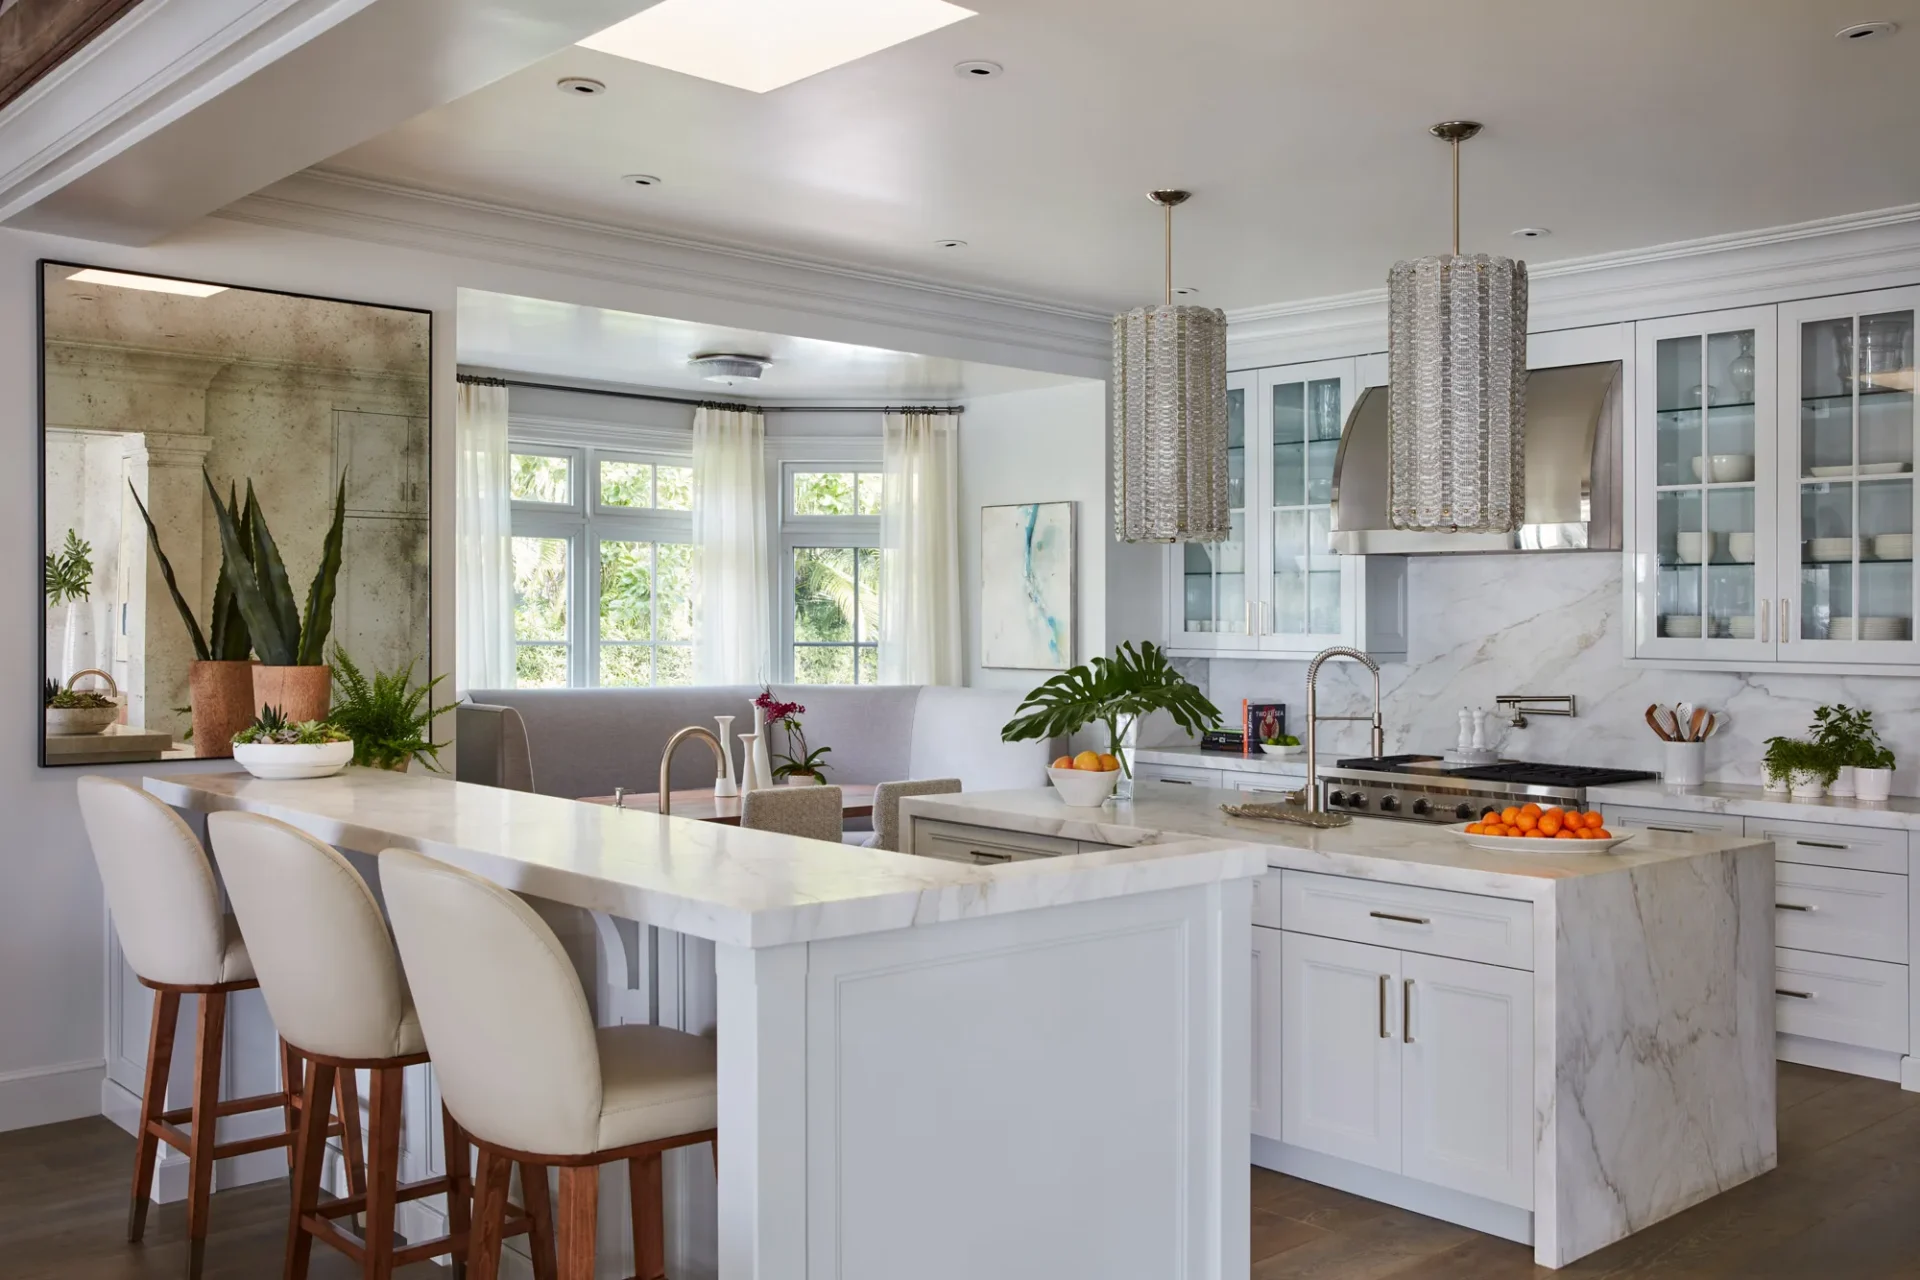 A kitchen with white cabinets and a large island.